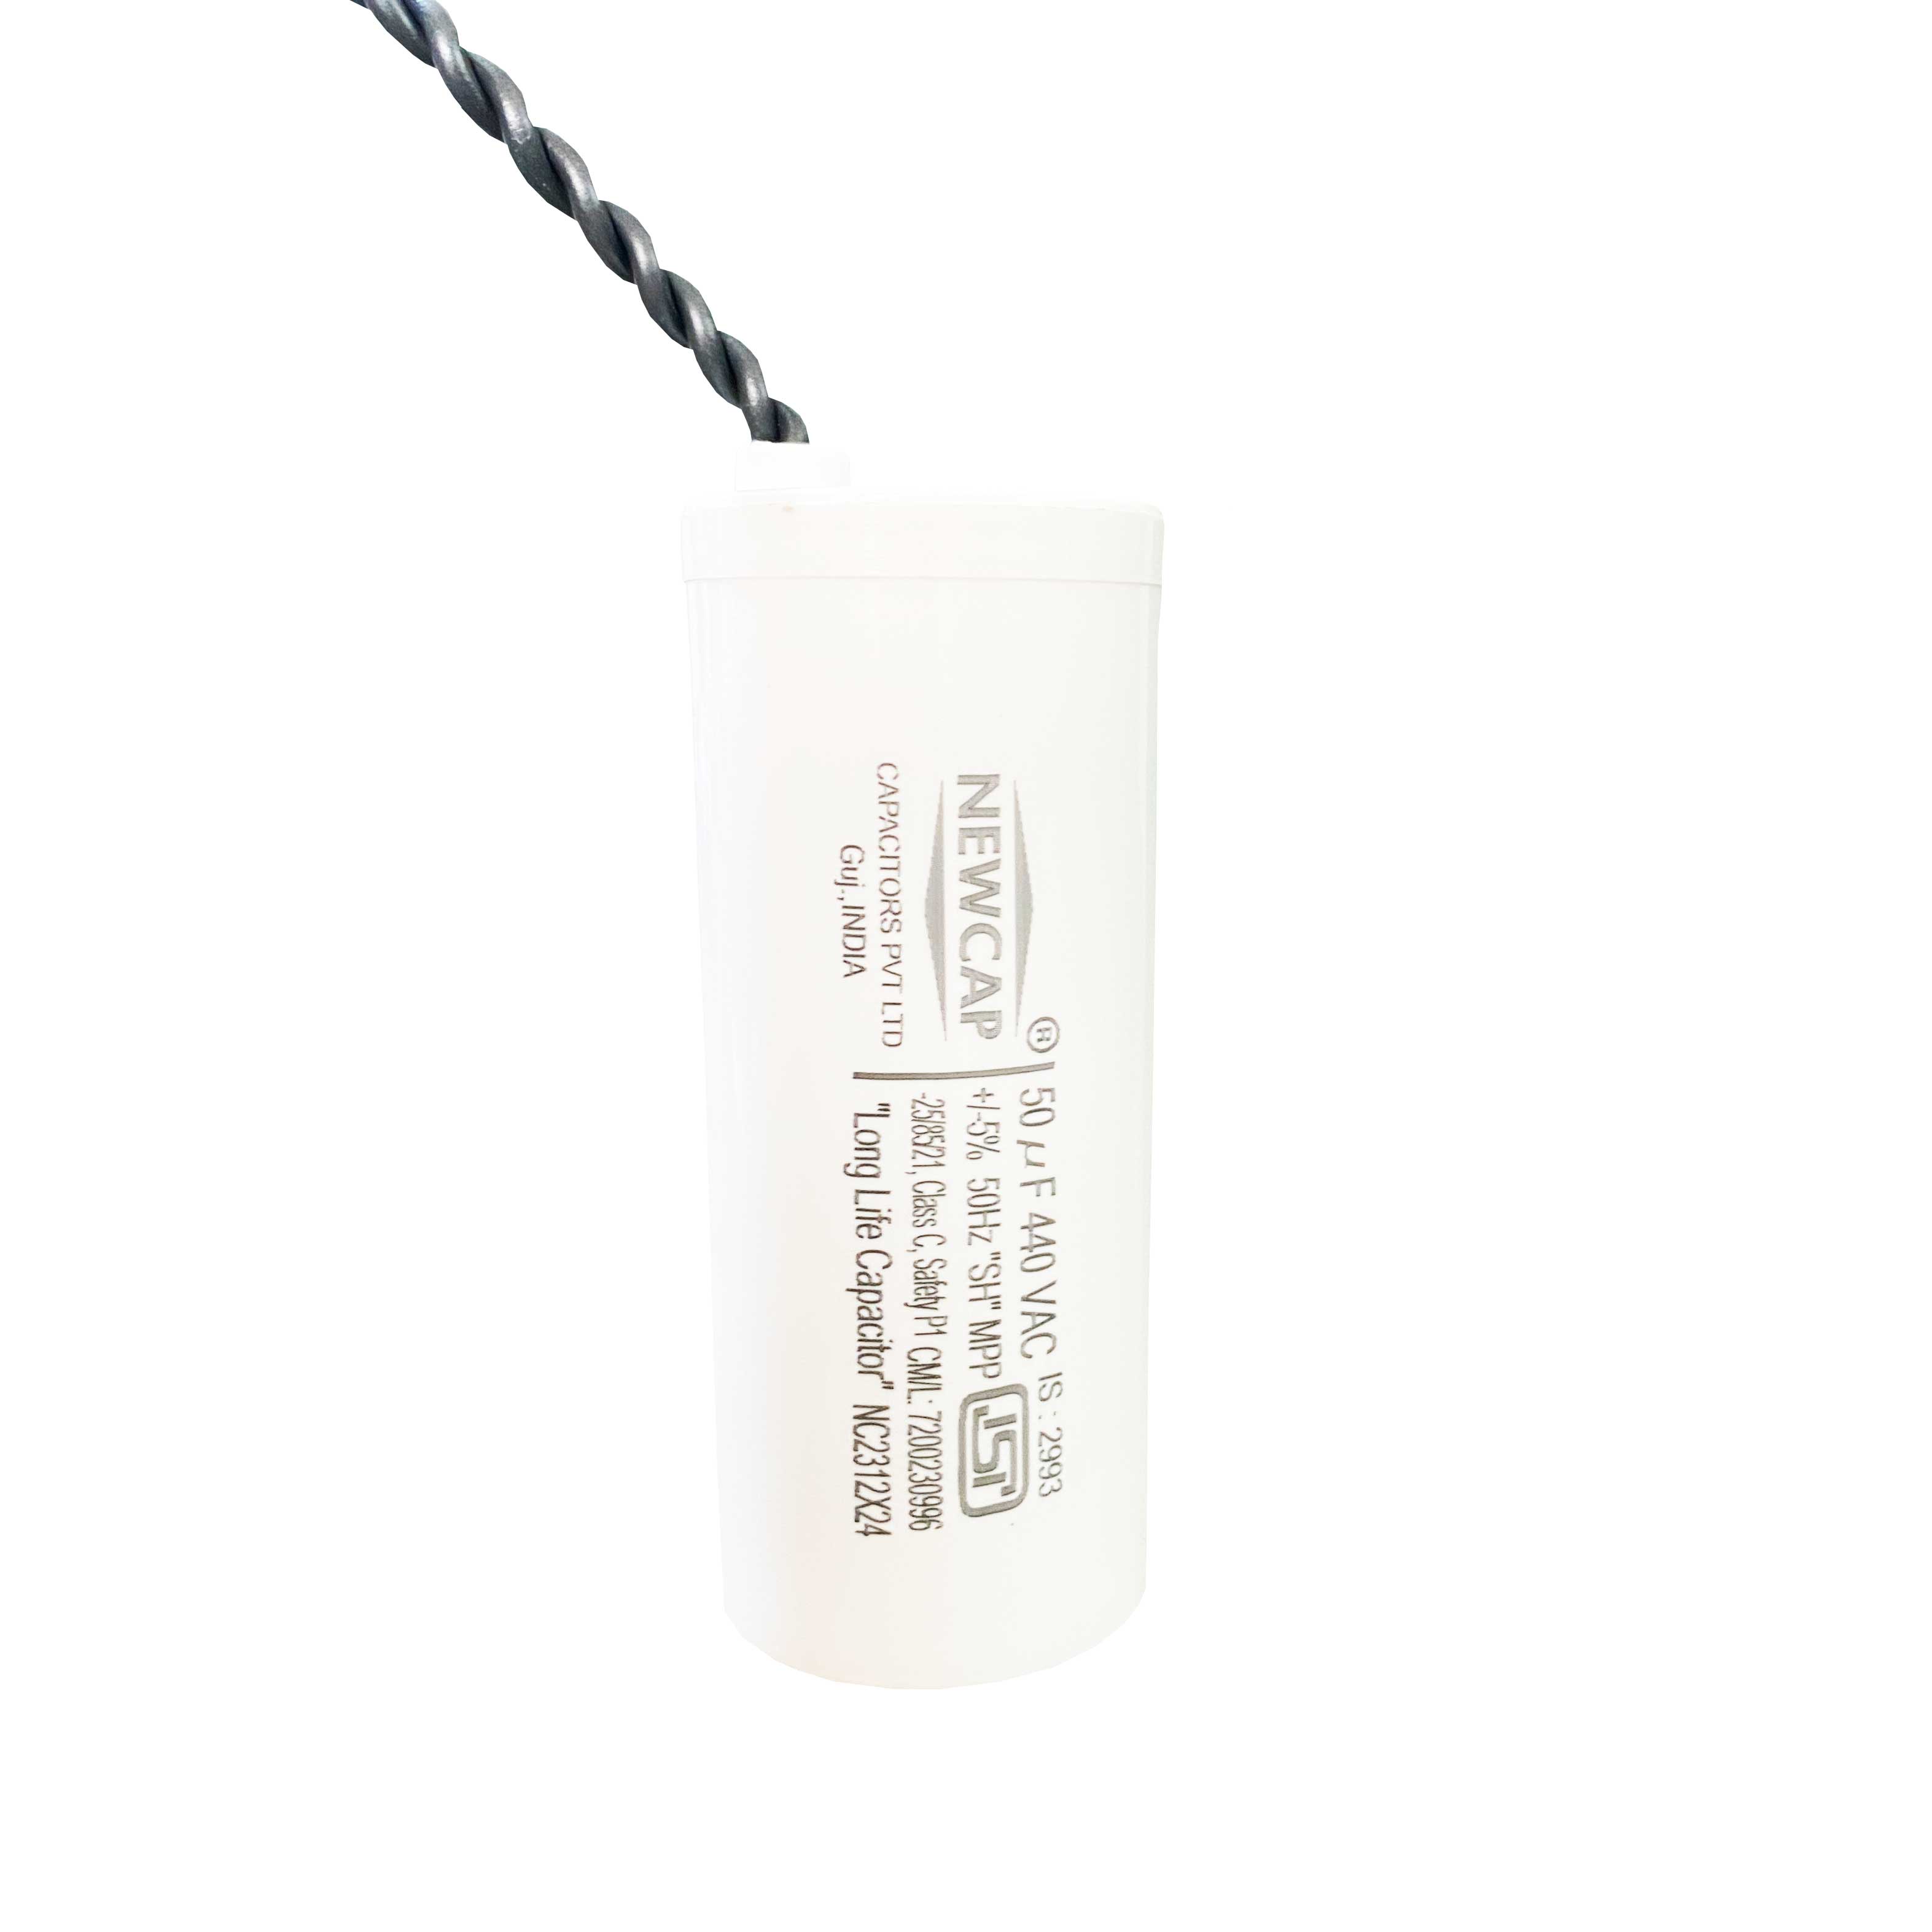 50 MFD Run Capacitor suitable for any motor 230 VAC